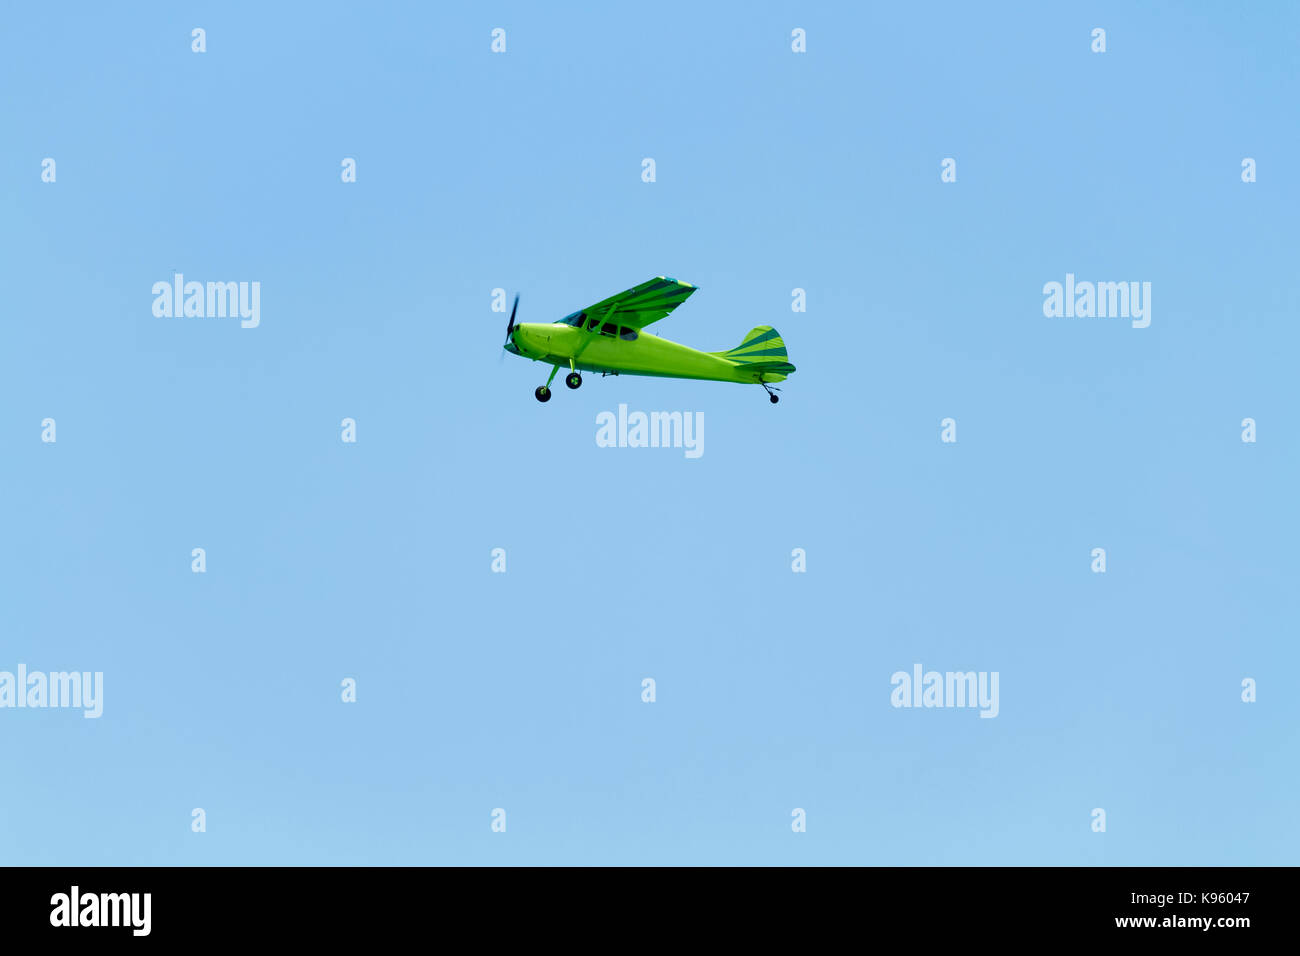 Airplane against blue sky Stock Photo